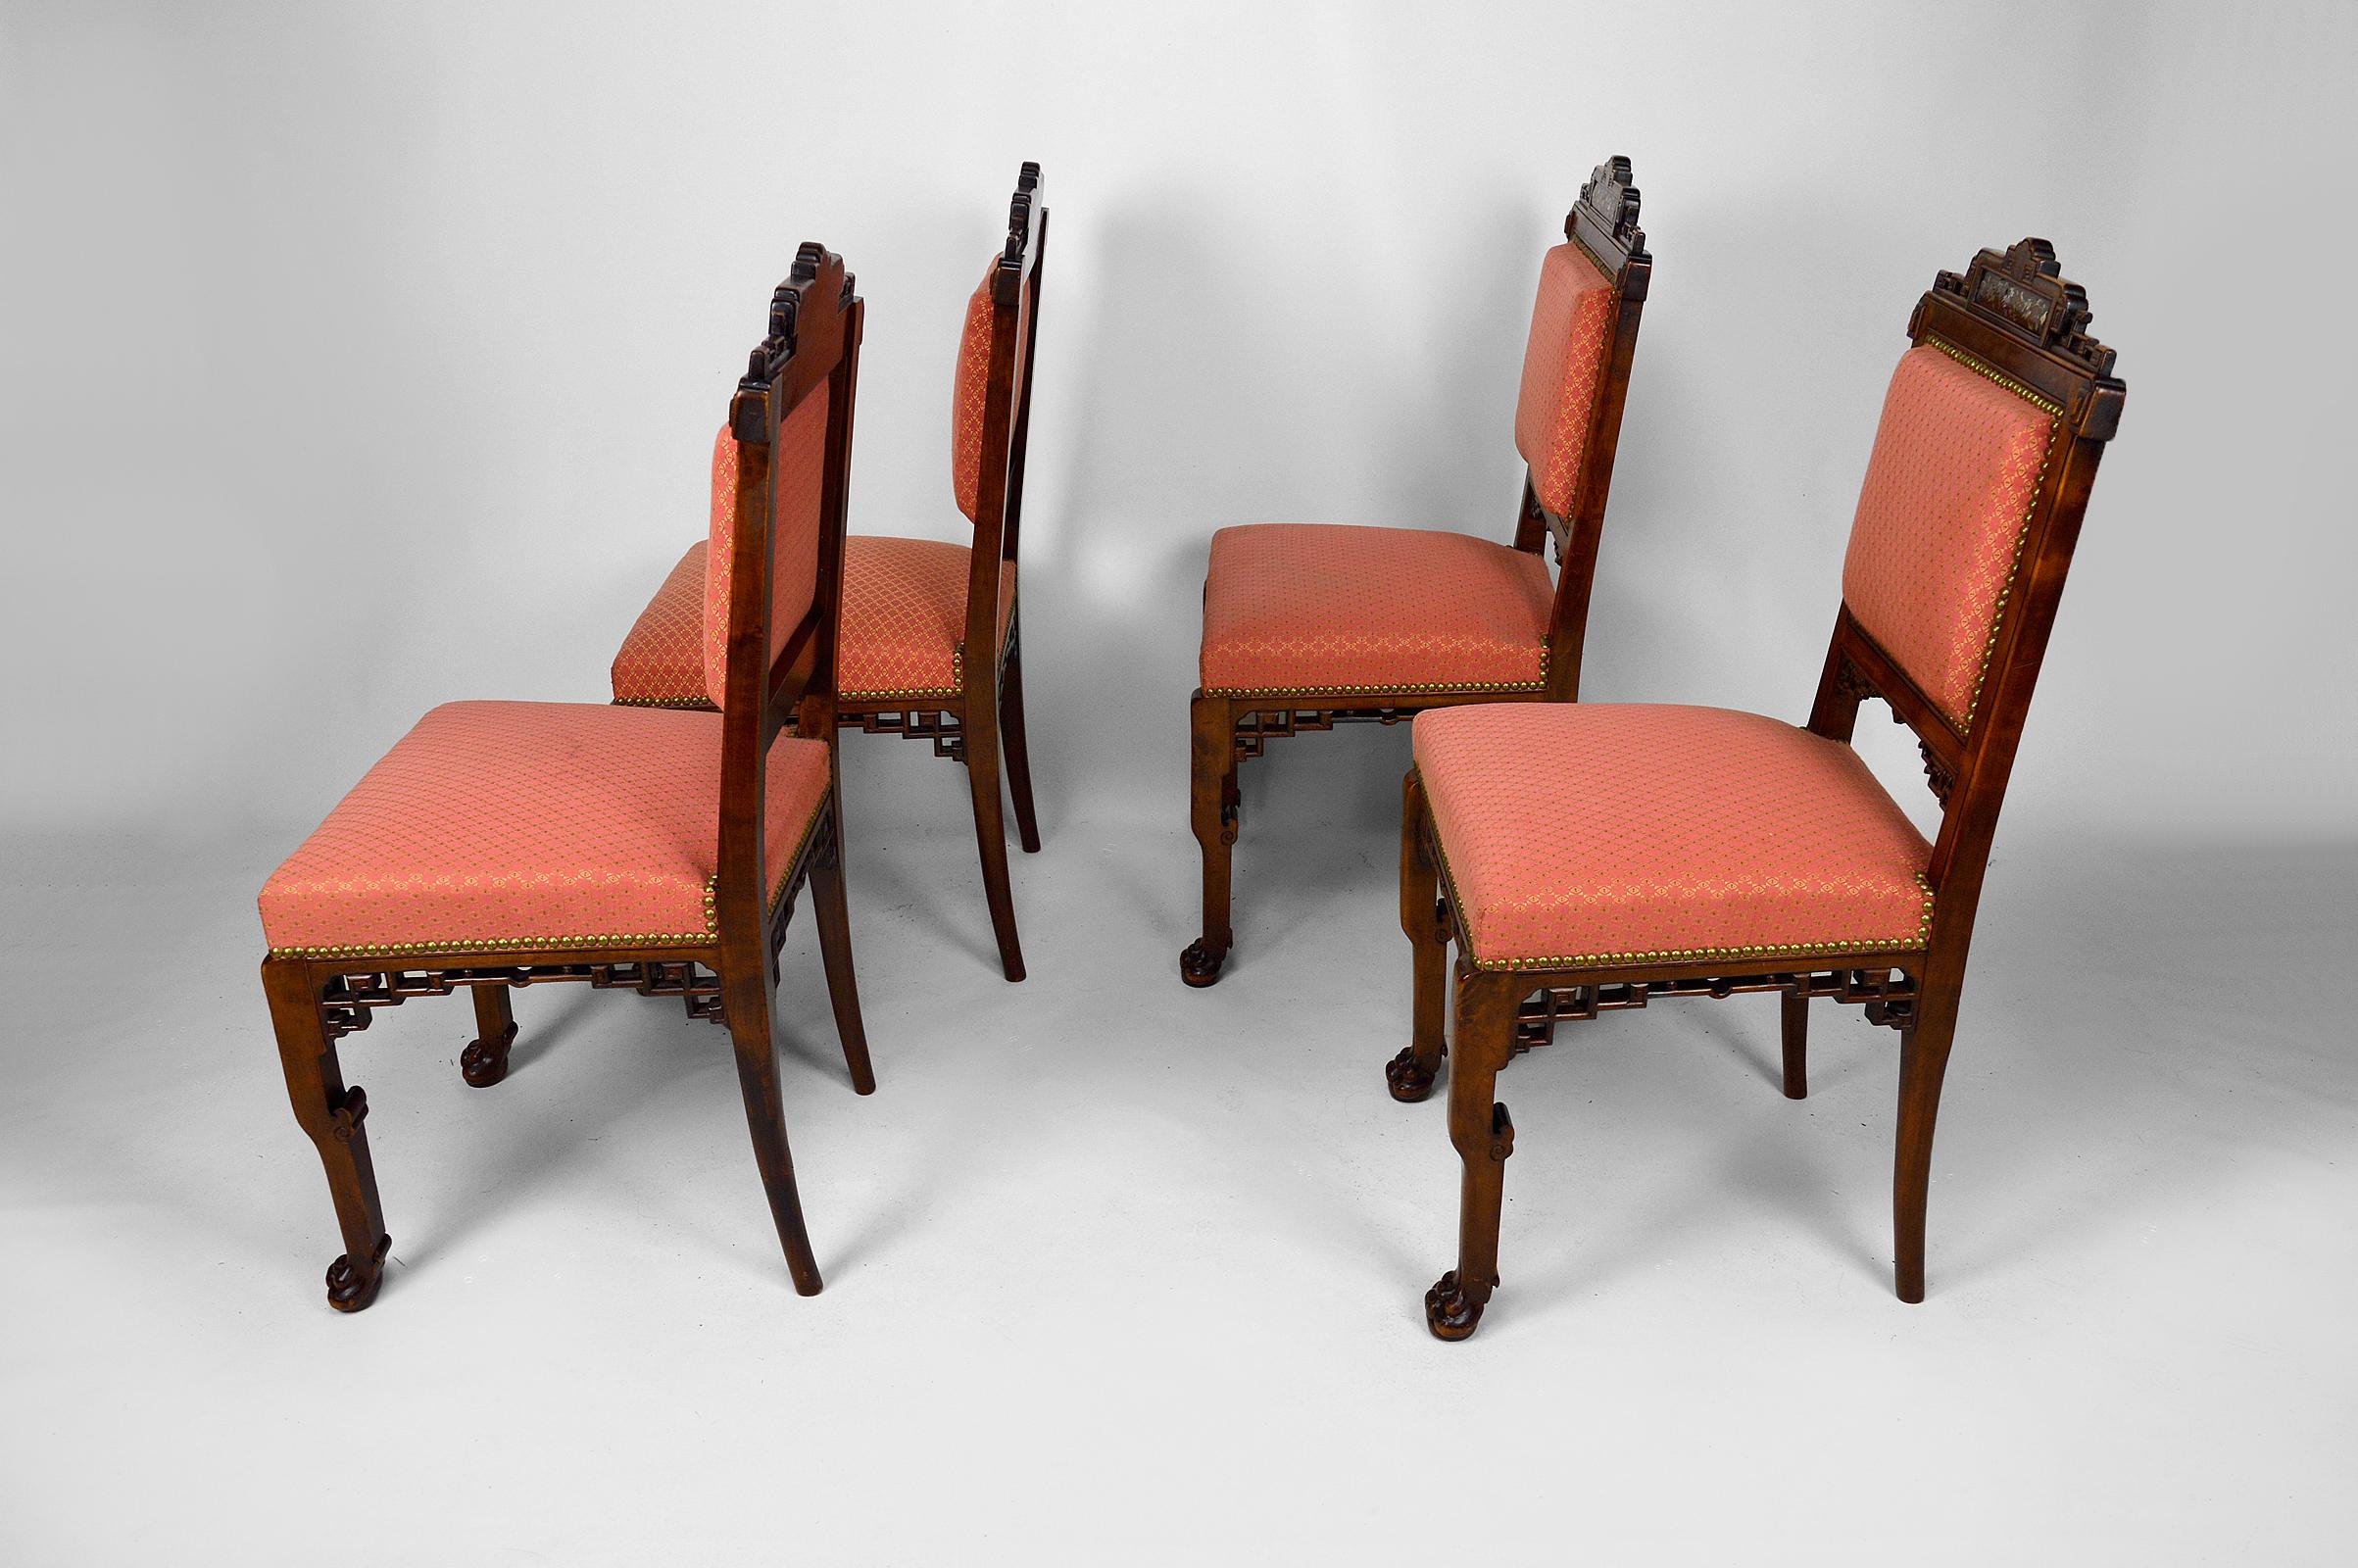 Superb set of 4 Japanese chairs.

Carved and inlaid wood.
Backrest pediments decorated with vegetal friezes marquetry.
Feet in the shape of animal claw paws, characteristic of the style.

Elegant quality fabric.

Art Nouveau / Japonisme, France,